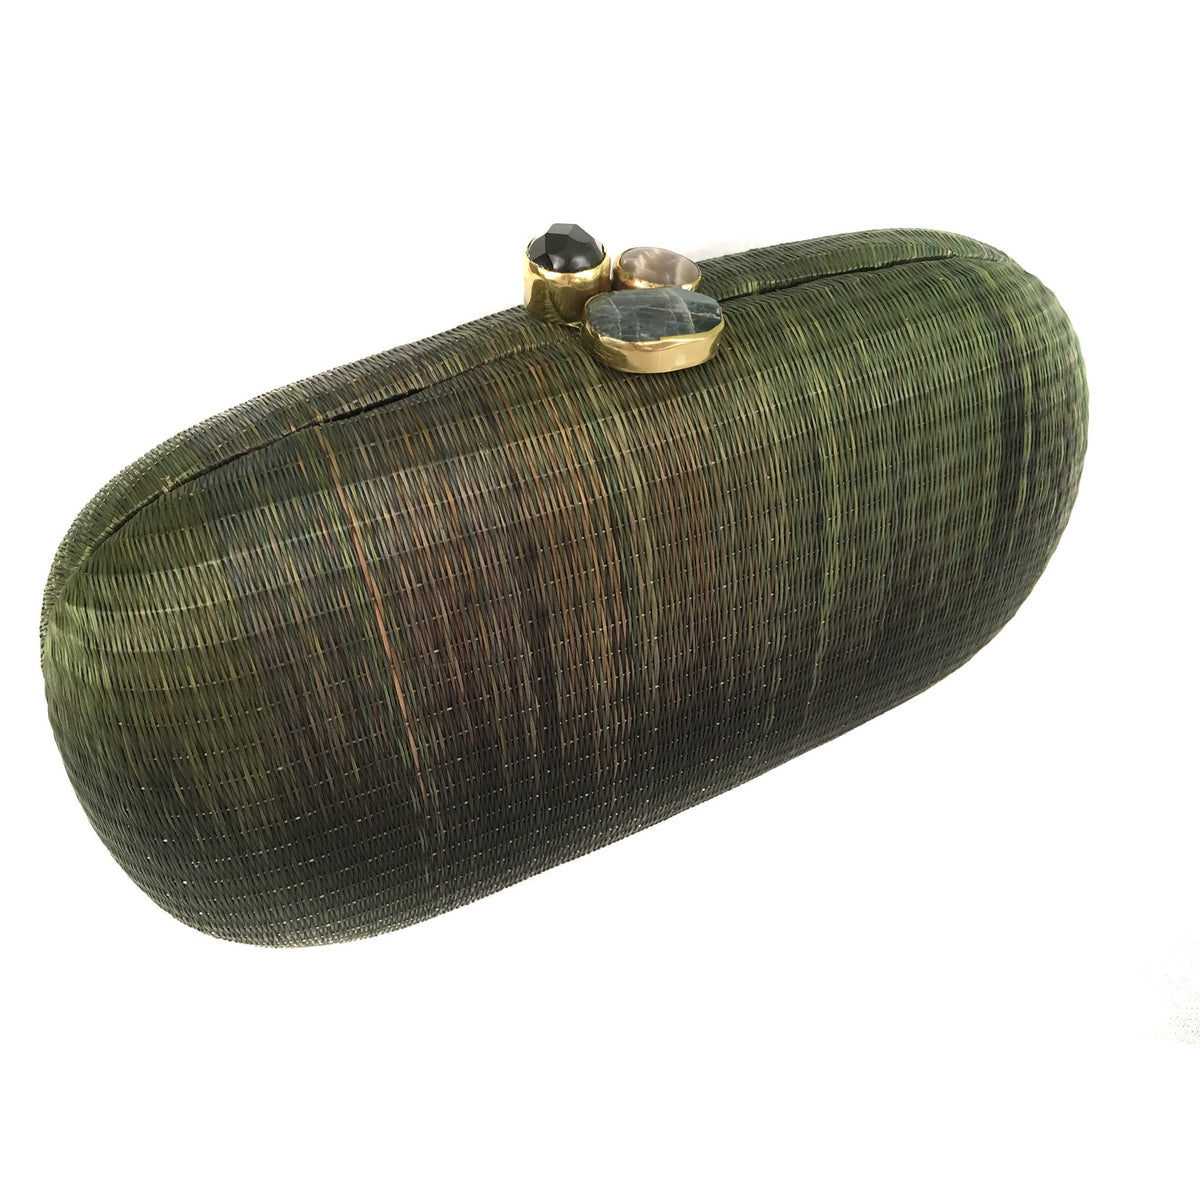 GALLERY — Textures Bags & Clutches